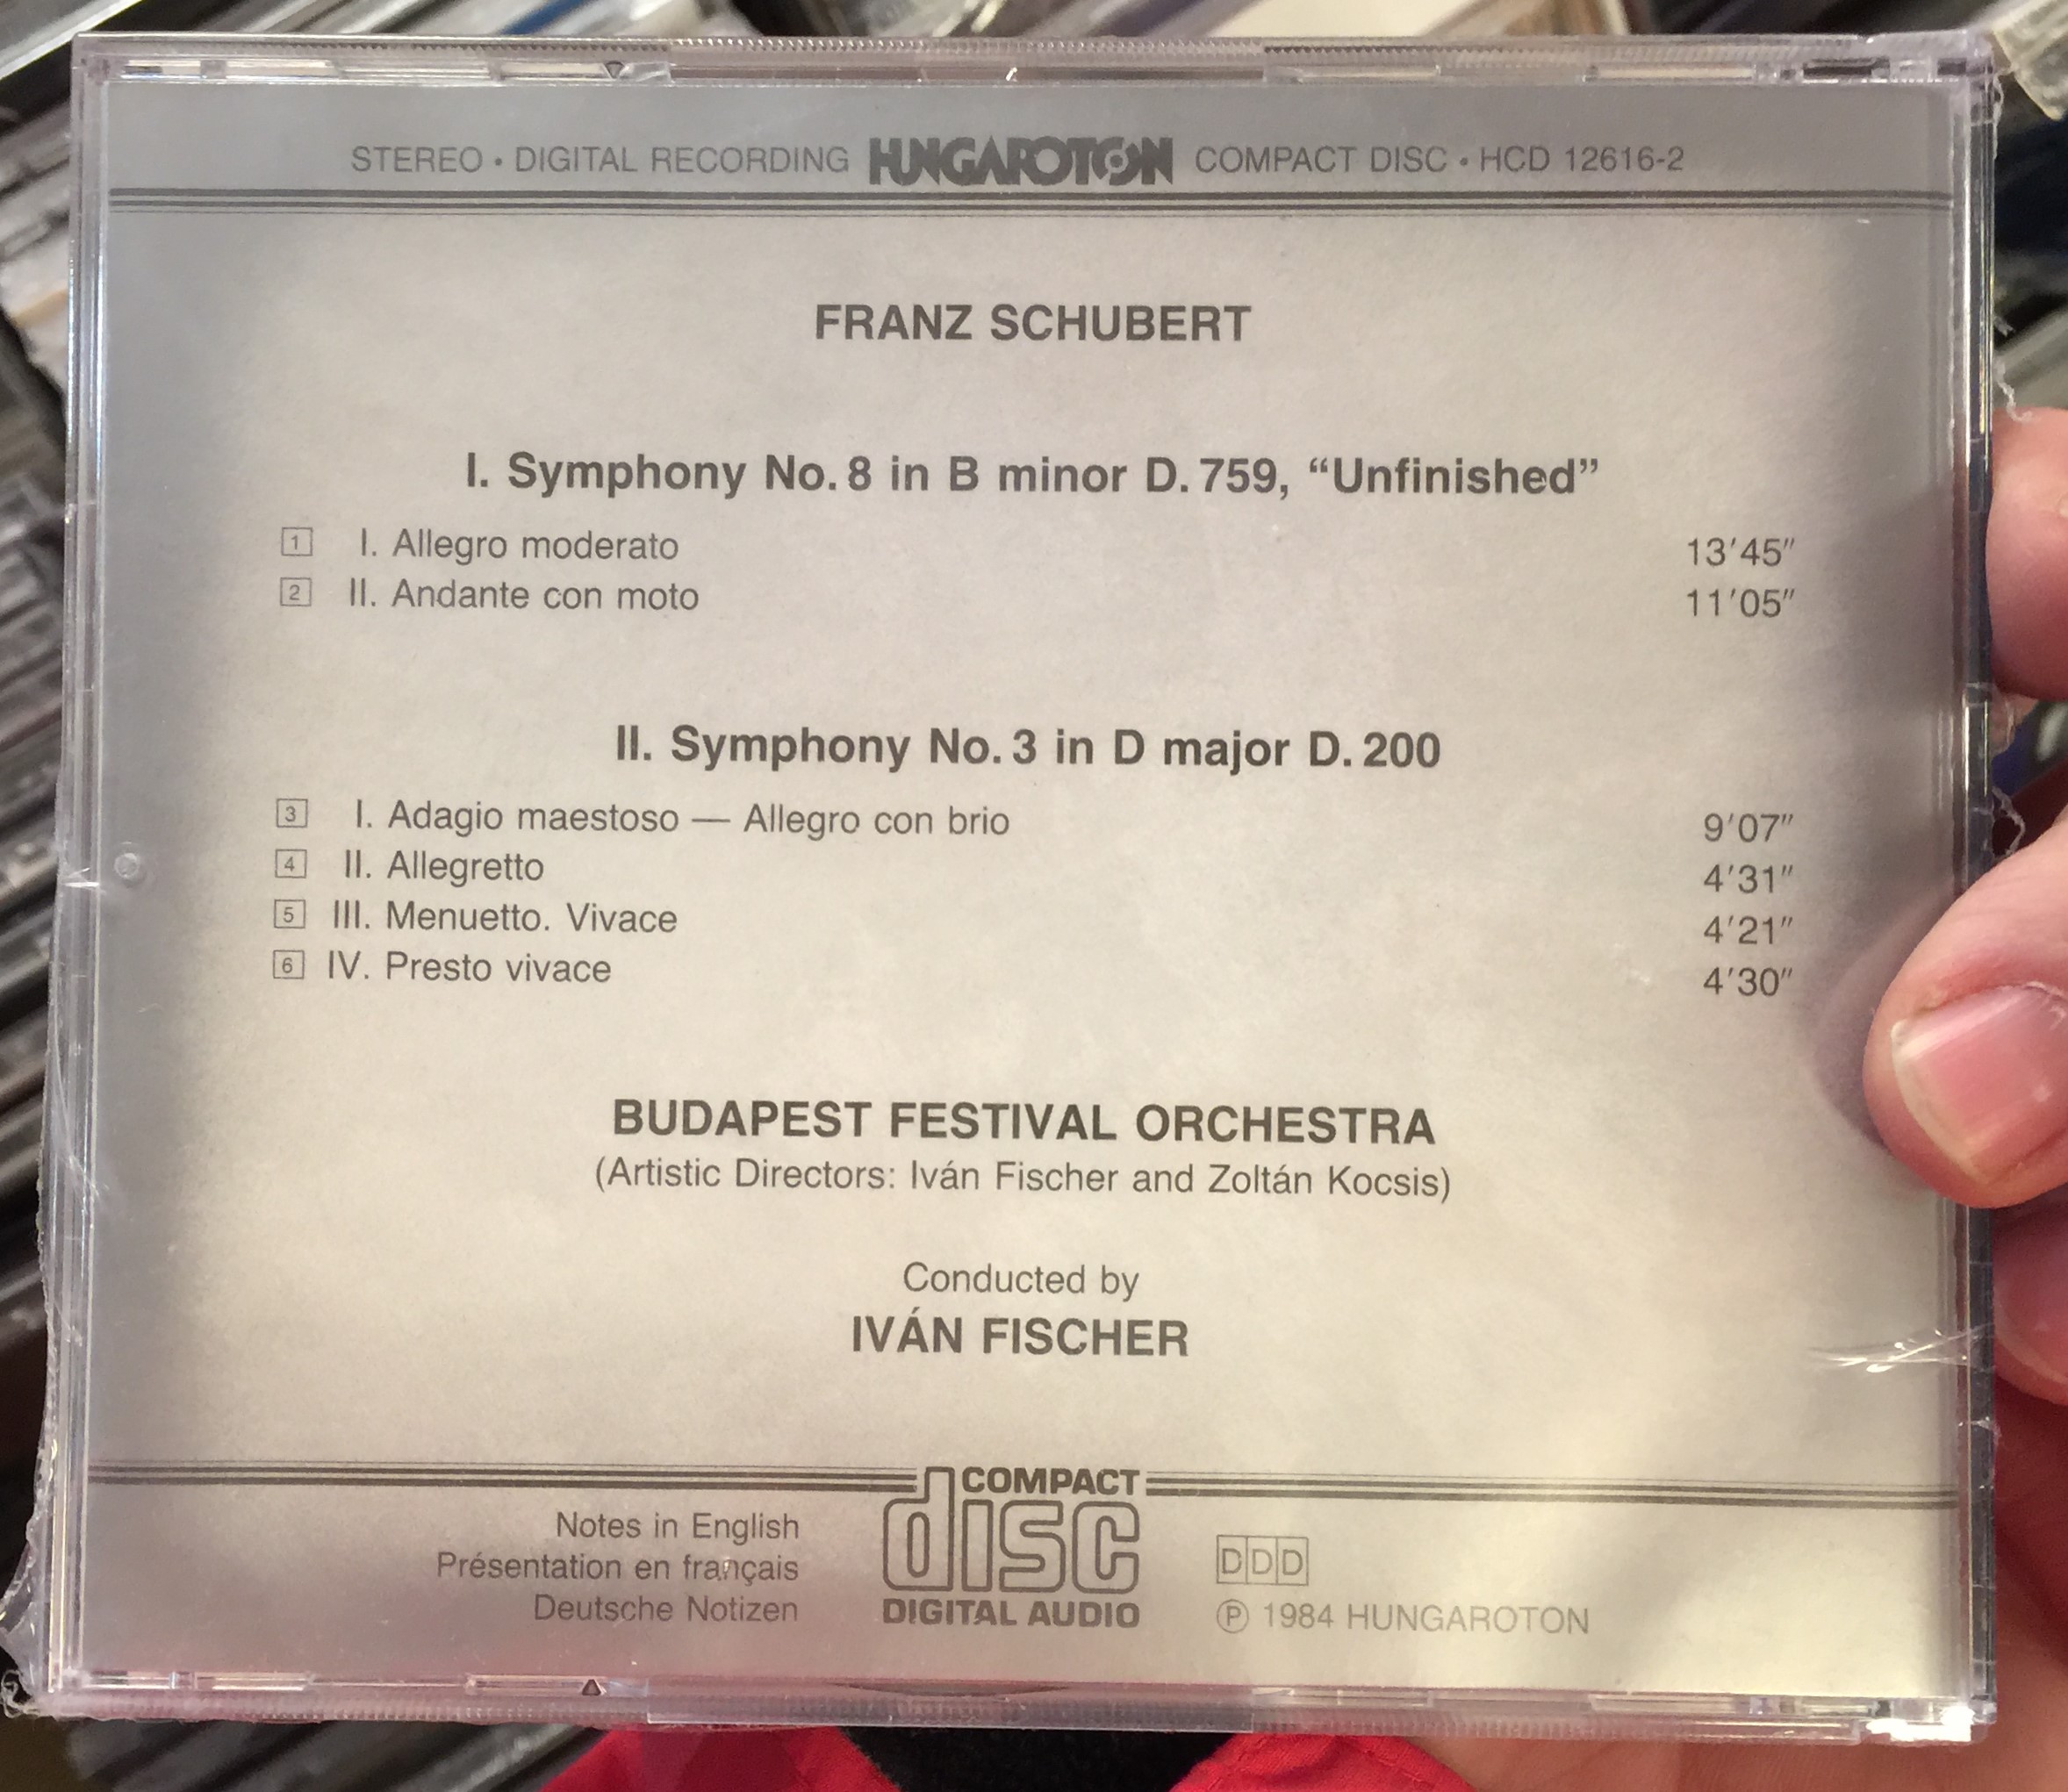 schubert-symphony-no.-8-in-b-minor-unfinished-symphony-no.-3-in-d-major-budapest-festival-orchestra-iv-n-fischer-hungaroton-audio-cd-1984-stereo-hcd-12616-2-2-.jpg